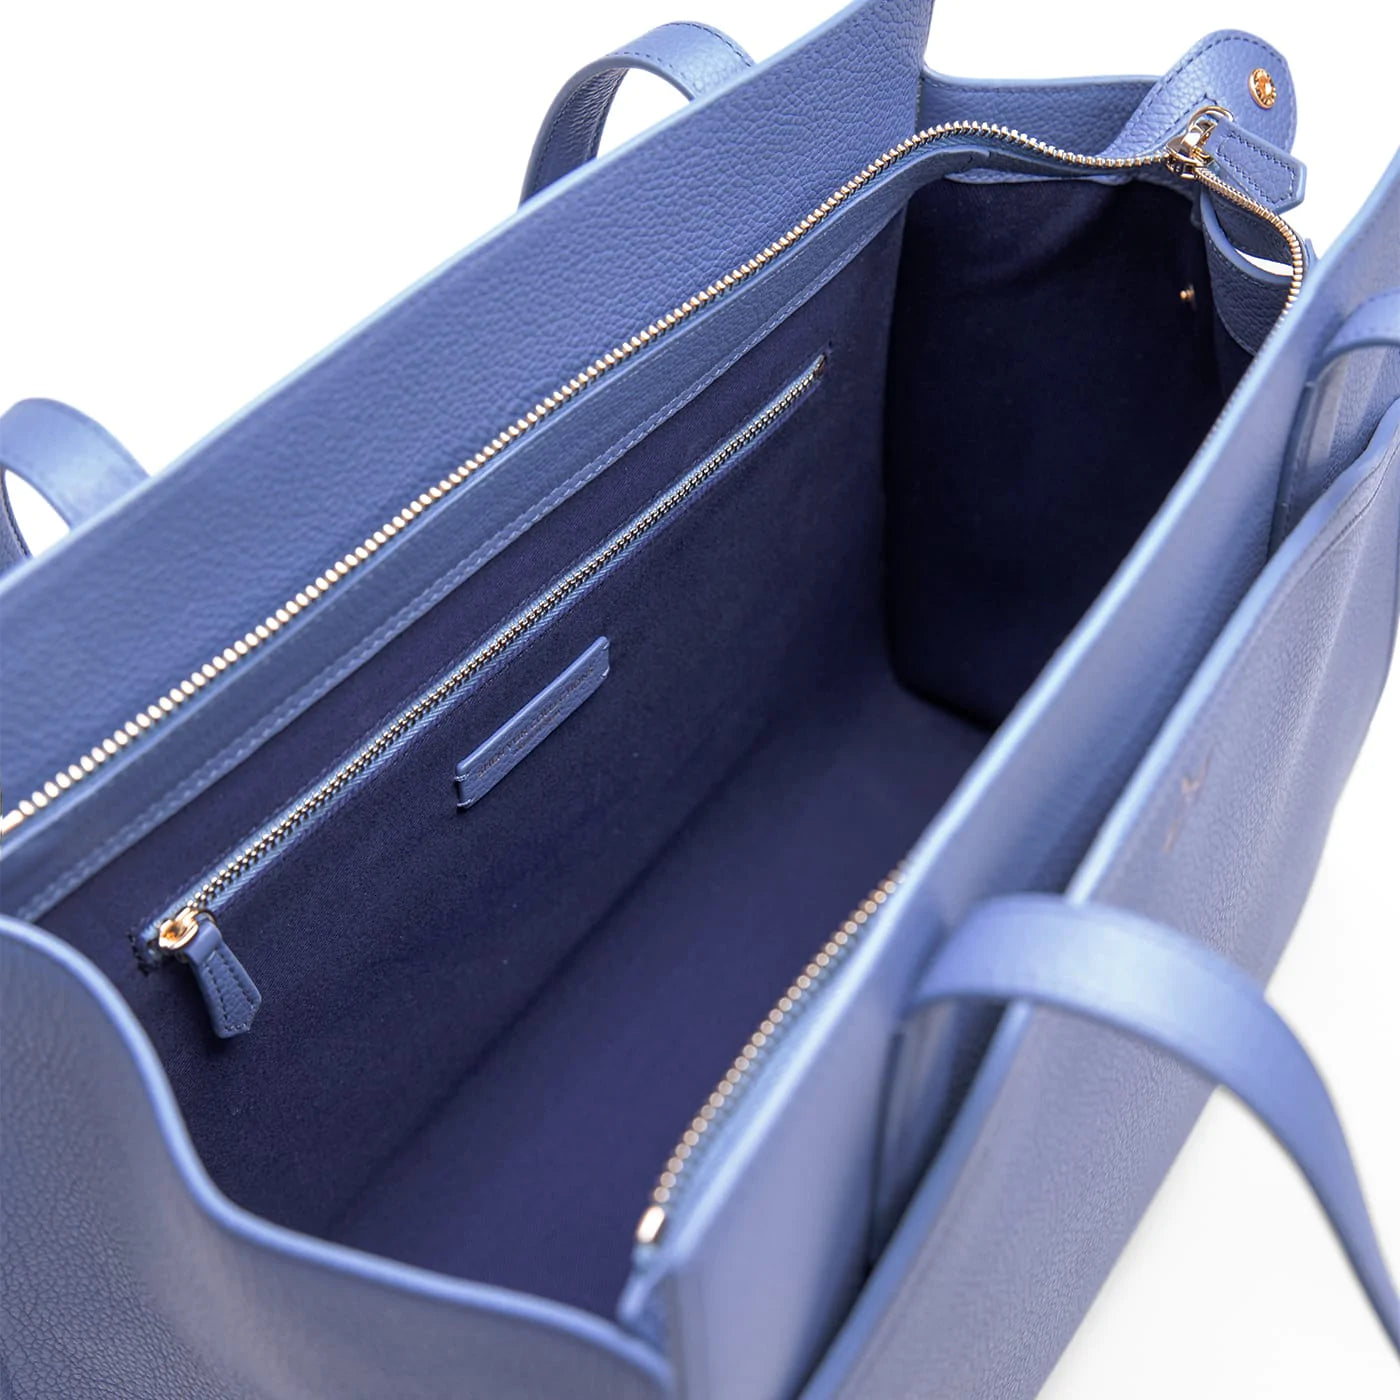 Tang Dynasty Grace Tote - Cornflower Blue